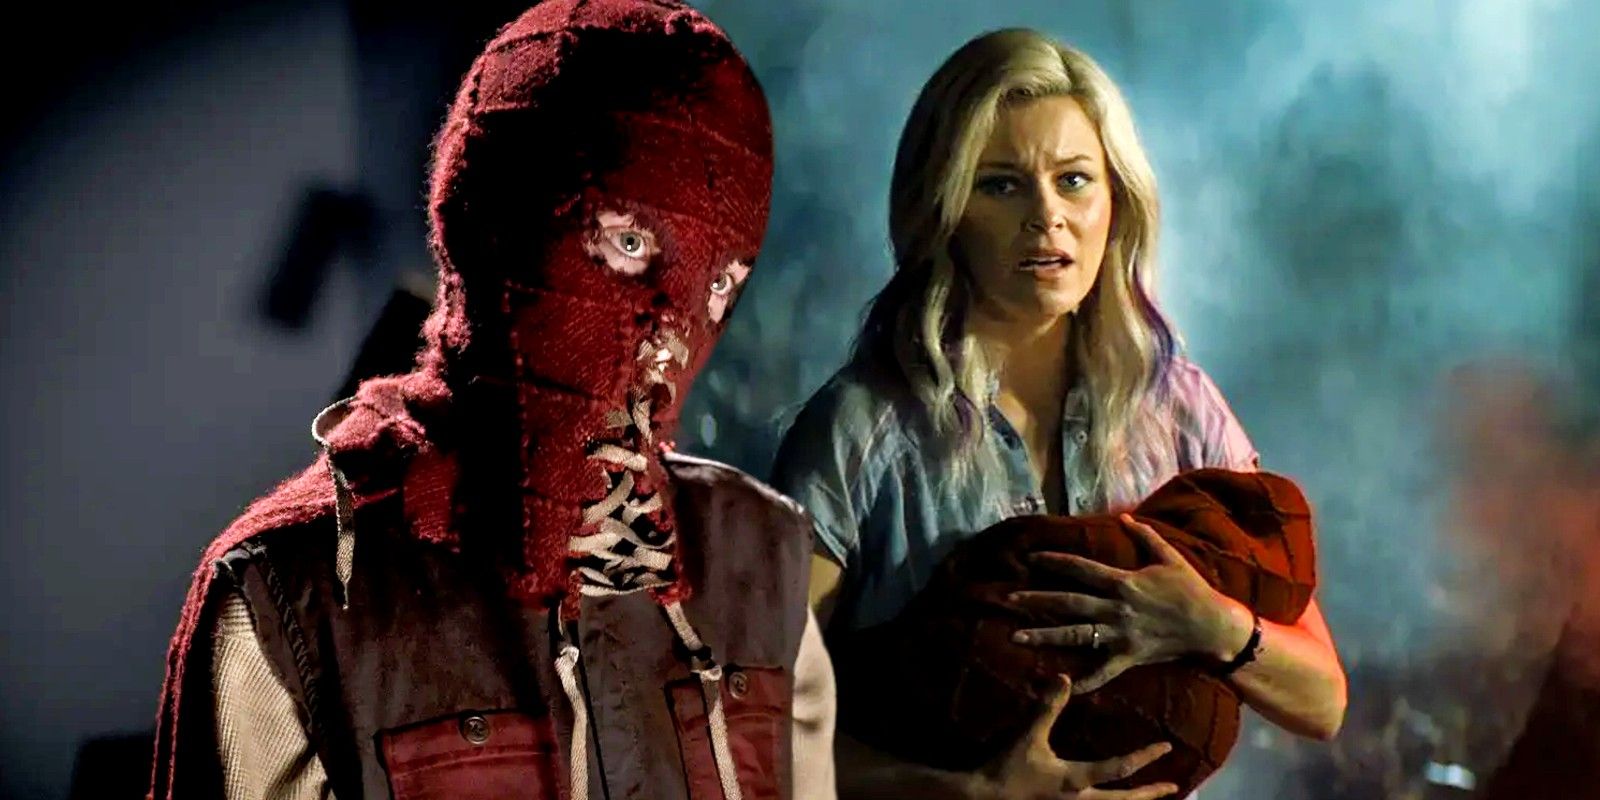 Custom image of a young boy wearing a mask and a mother holding a baby in Brightburn